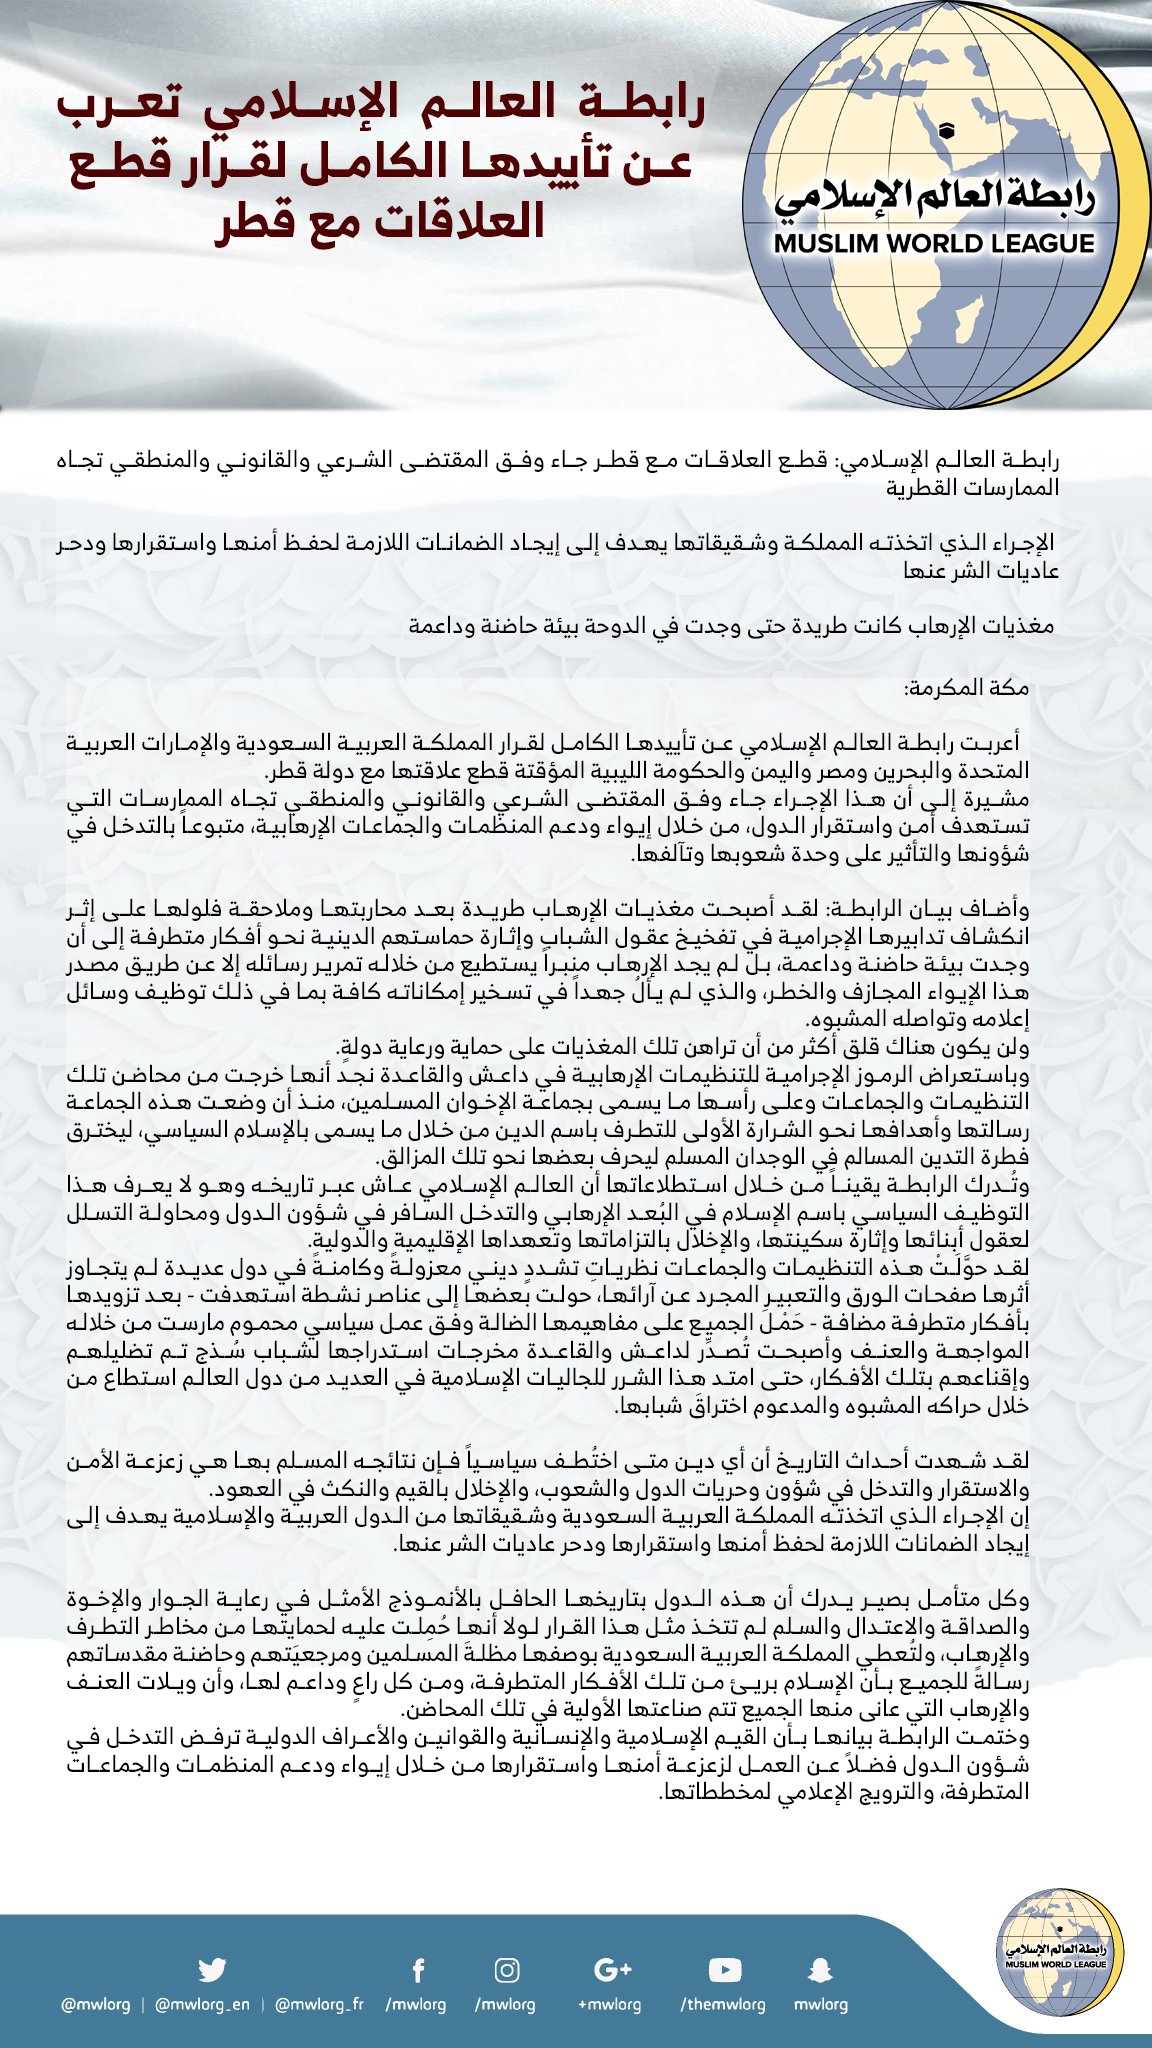 MWL expresses its full support for the severance of relations with Qatar